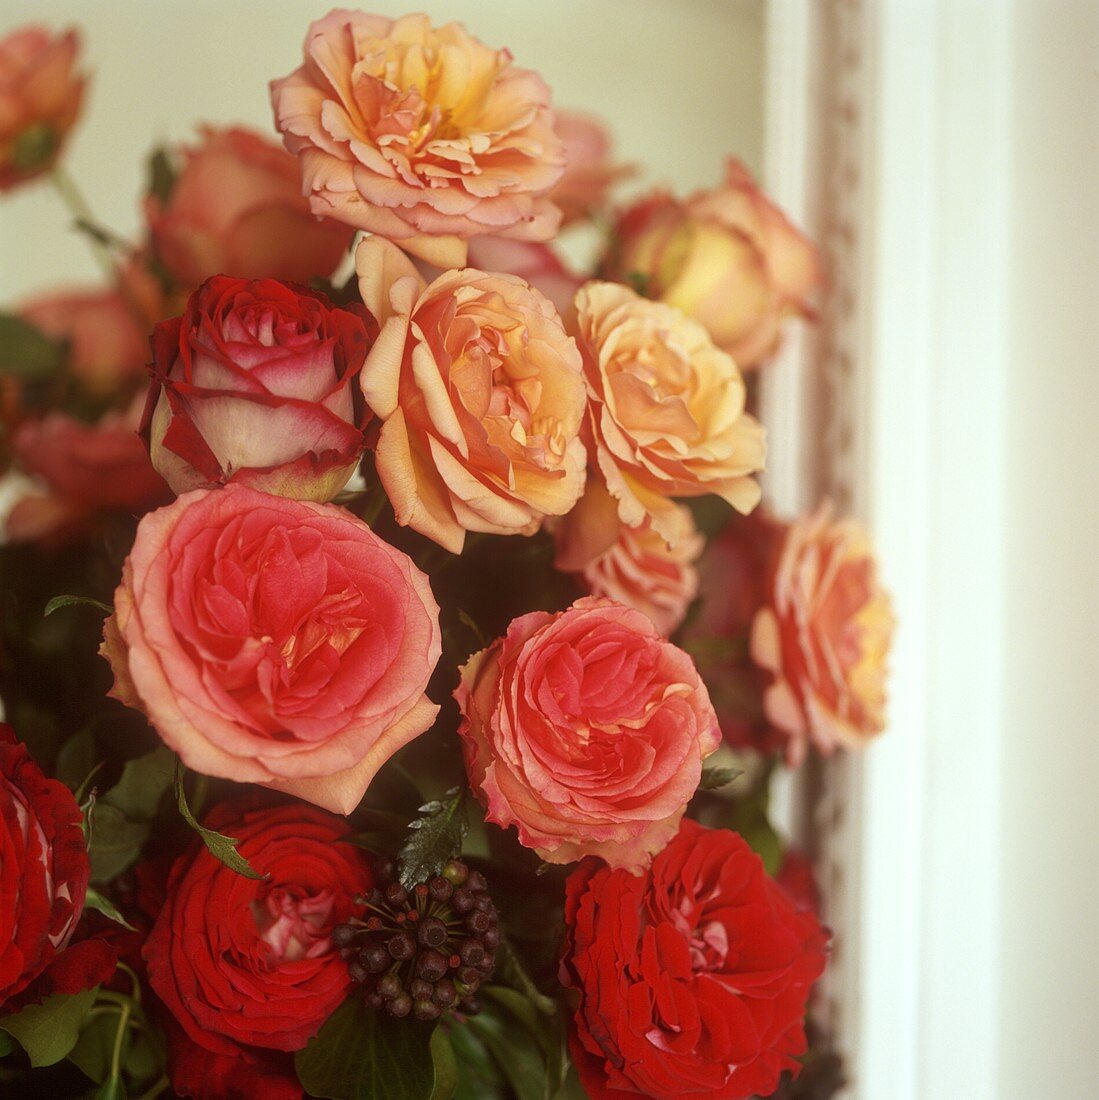 Bouquet of roses (close-up)